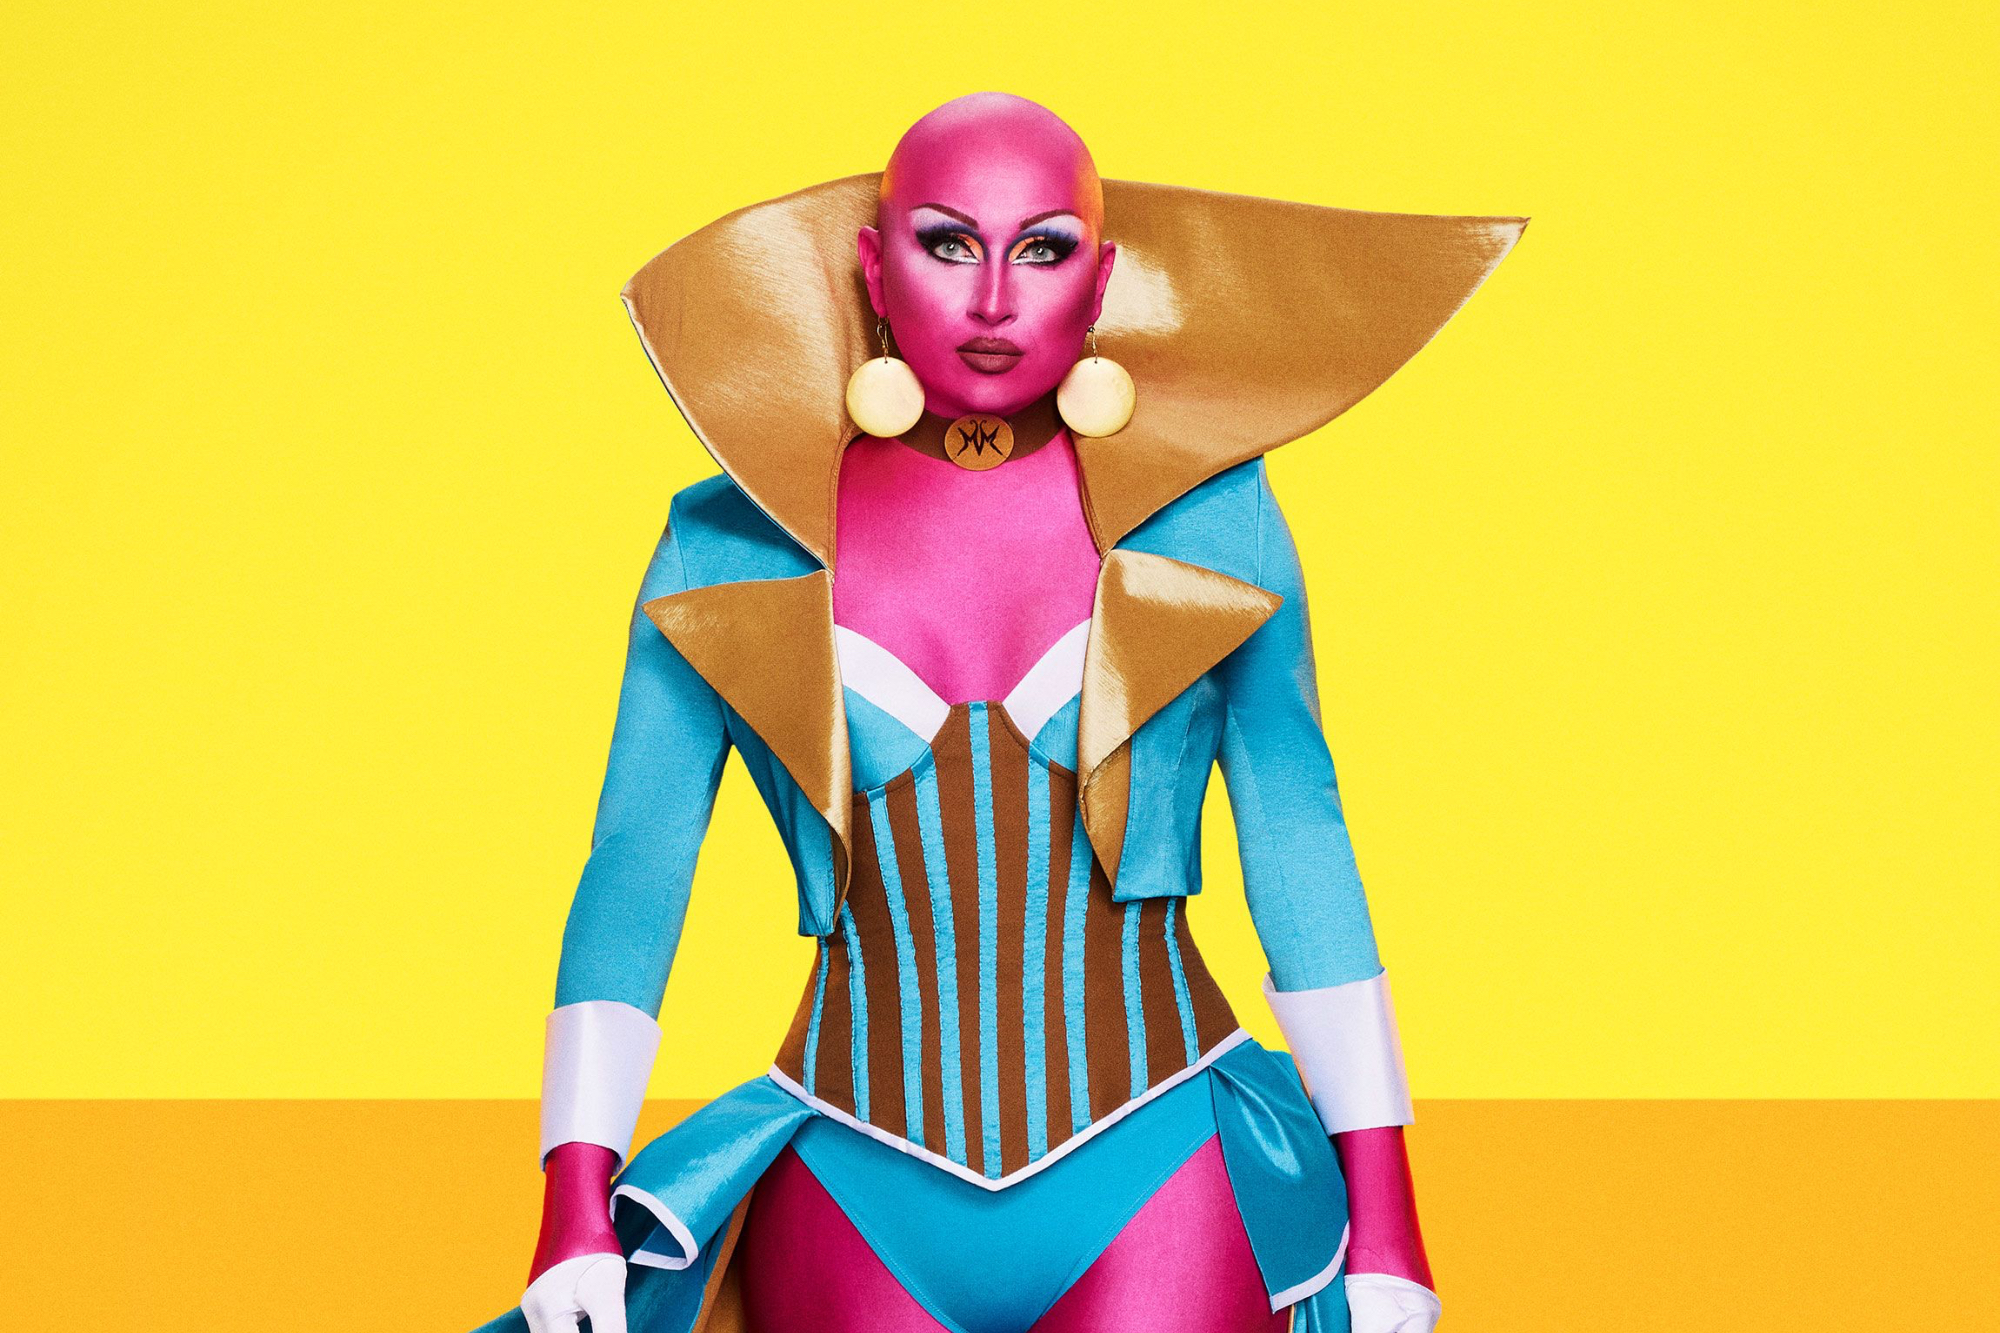 'RuPaul's Drag Race Untucked' Season 14 Episode 2 Maddy Morphosis with pink-painted skin and wearing blue and gold